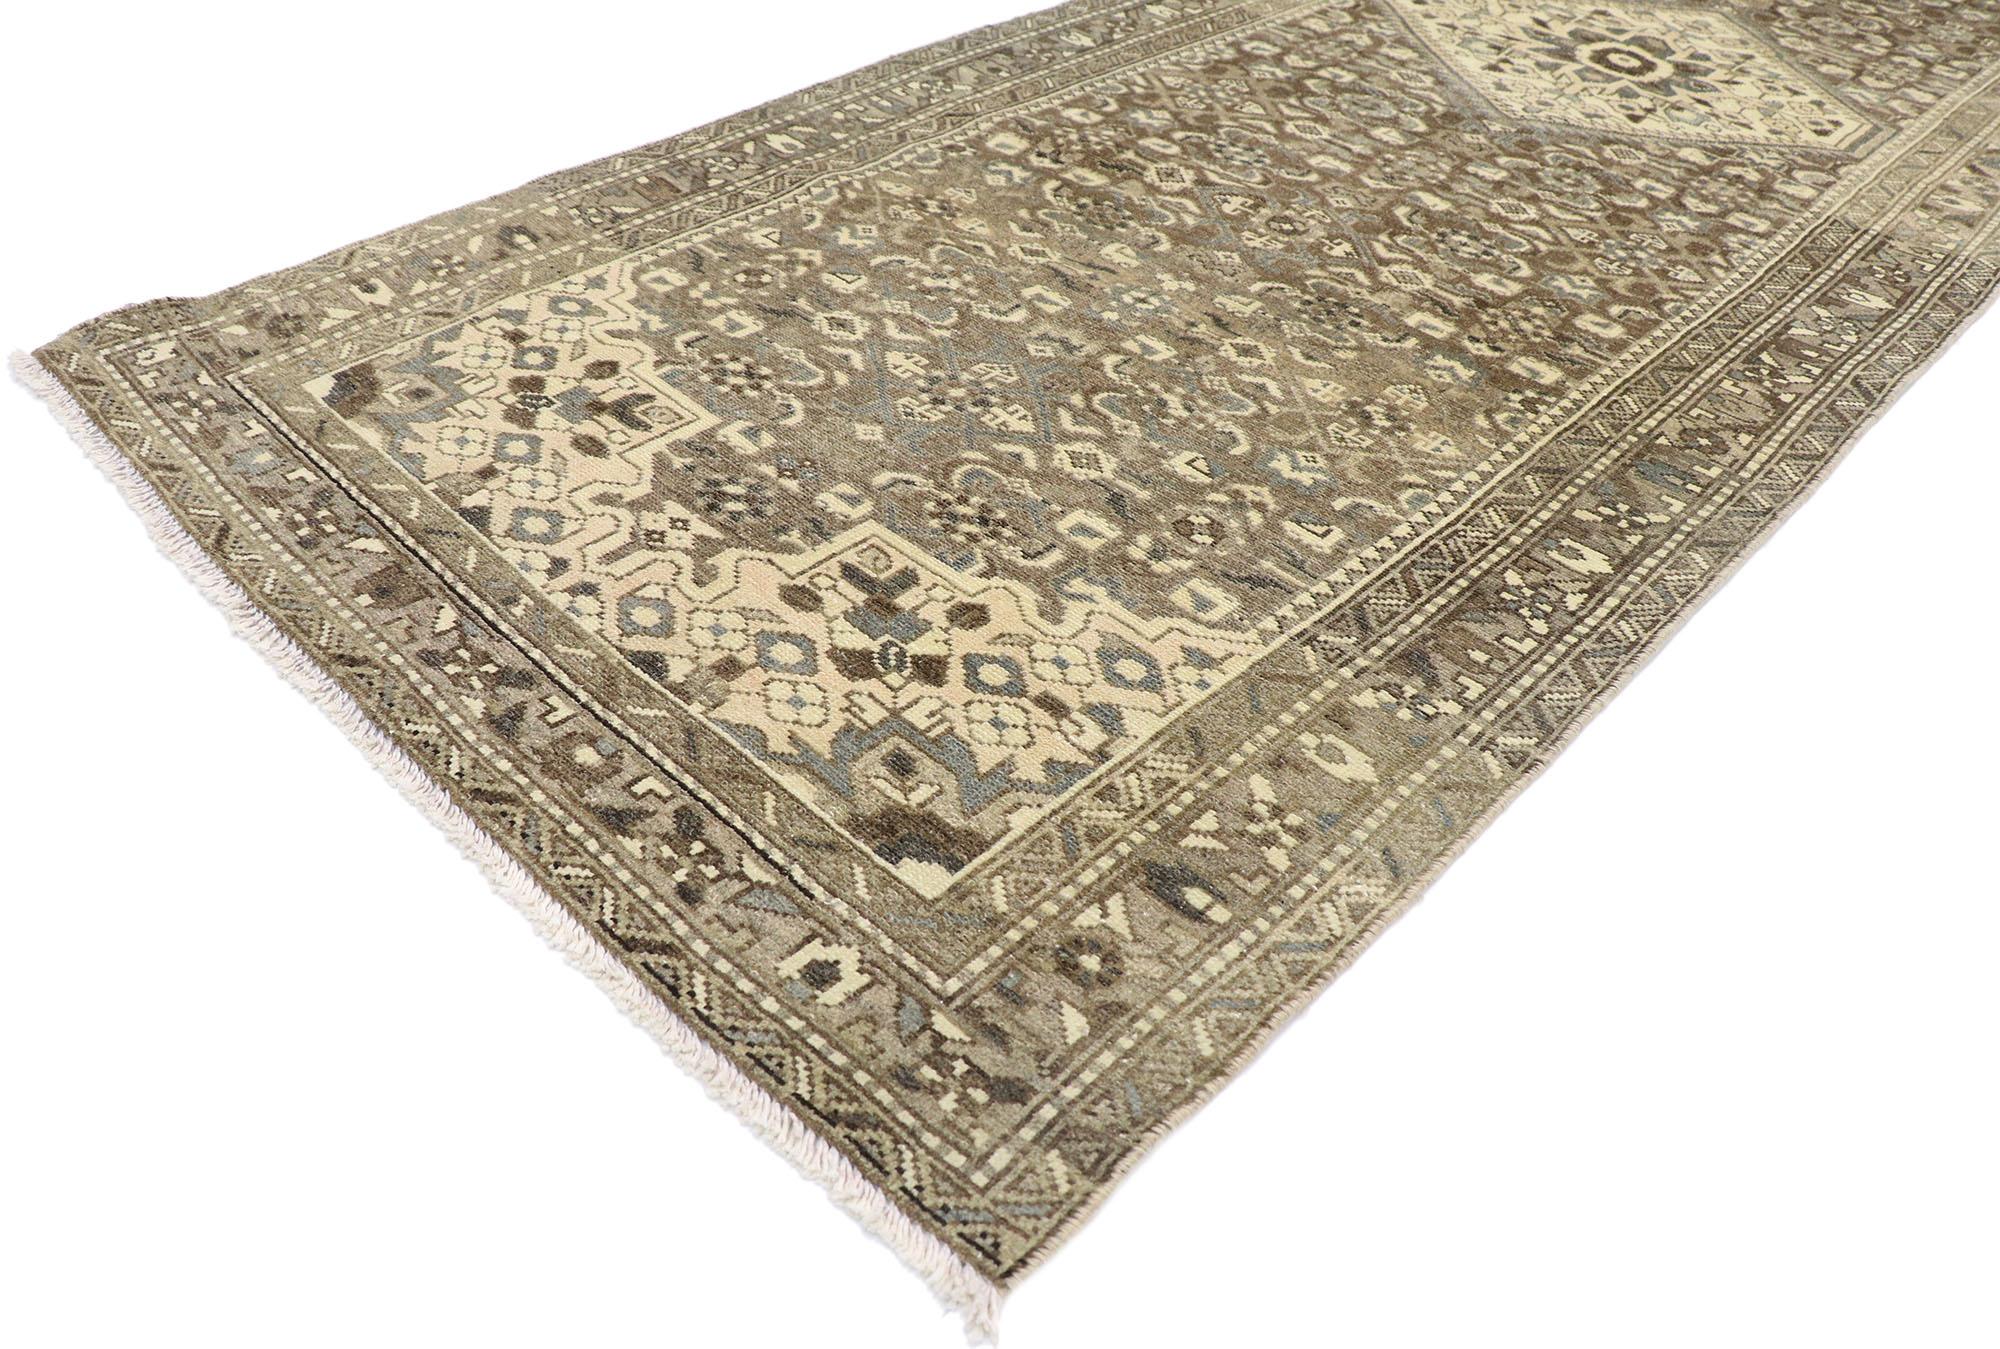 60877 Distressed Antique Persian Mahal runner with Modern Rustic Shaker style 03'04 x 10'02. With its timeless design and modern industrial style with rustic sensibility, this hand knotted wool distressed antique Persian Mahal runner will take on a